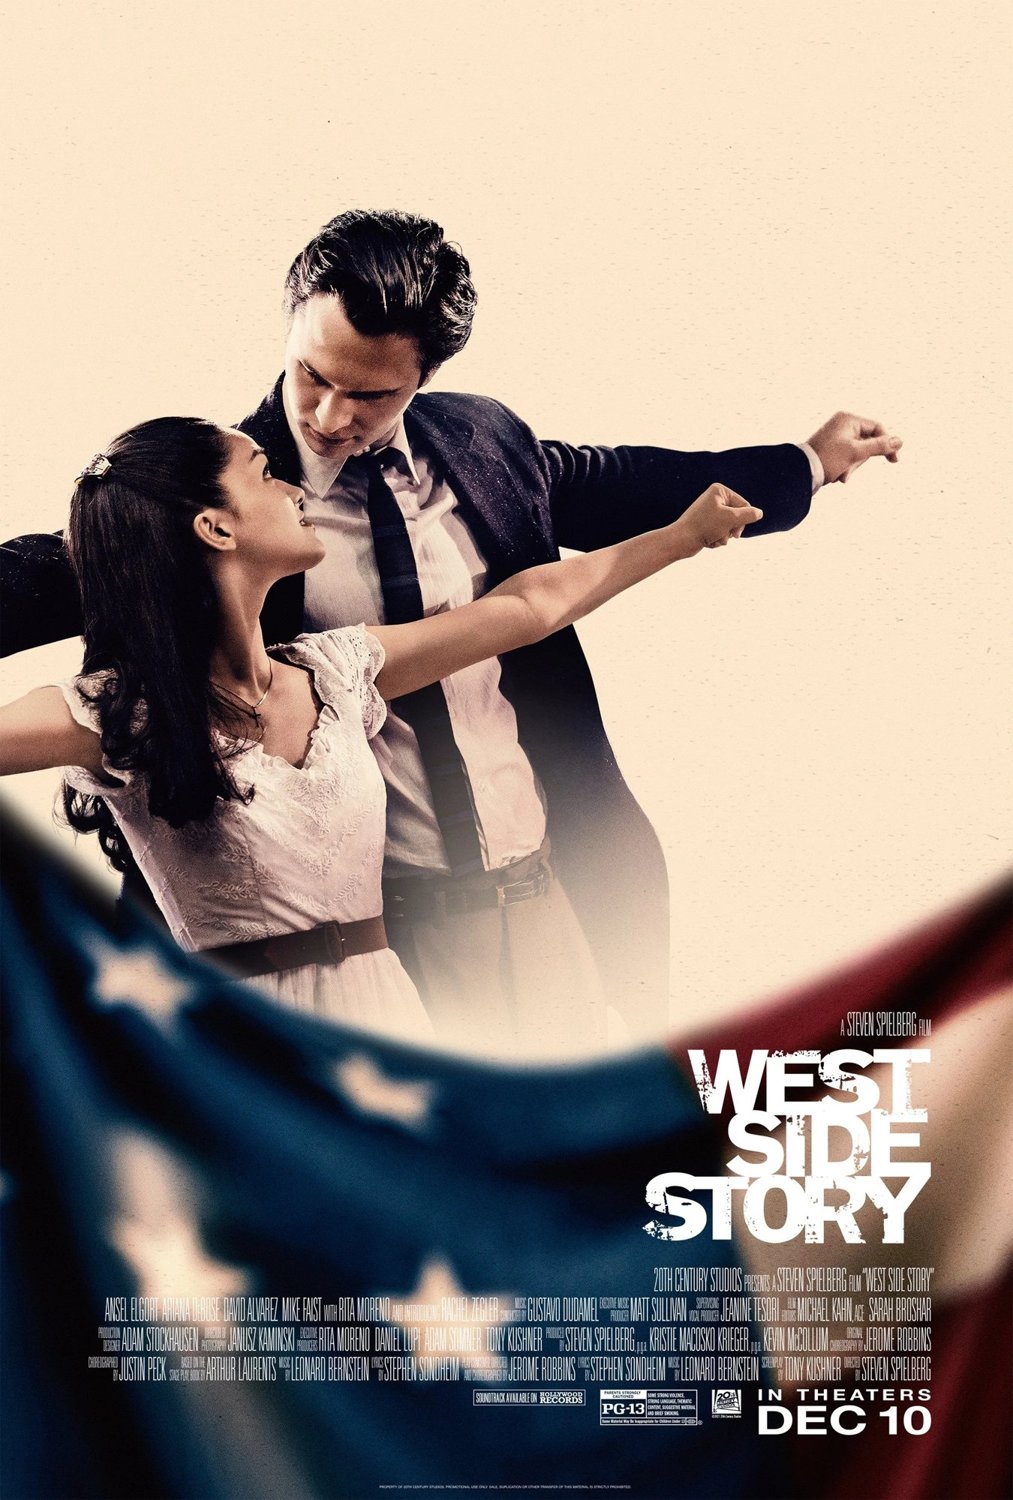 West Side Story 2021 Pictures Trailer Reviews News DVD and